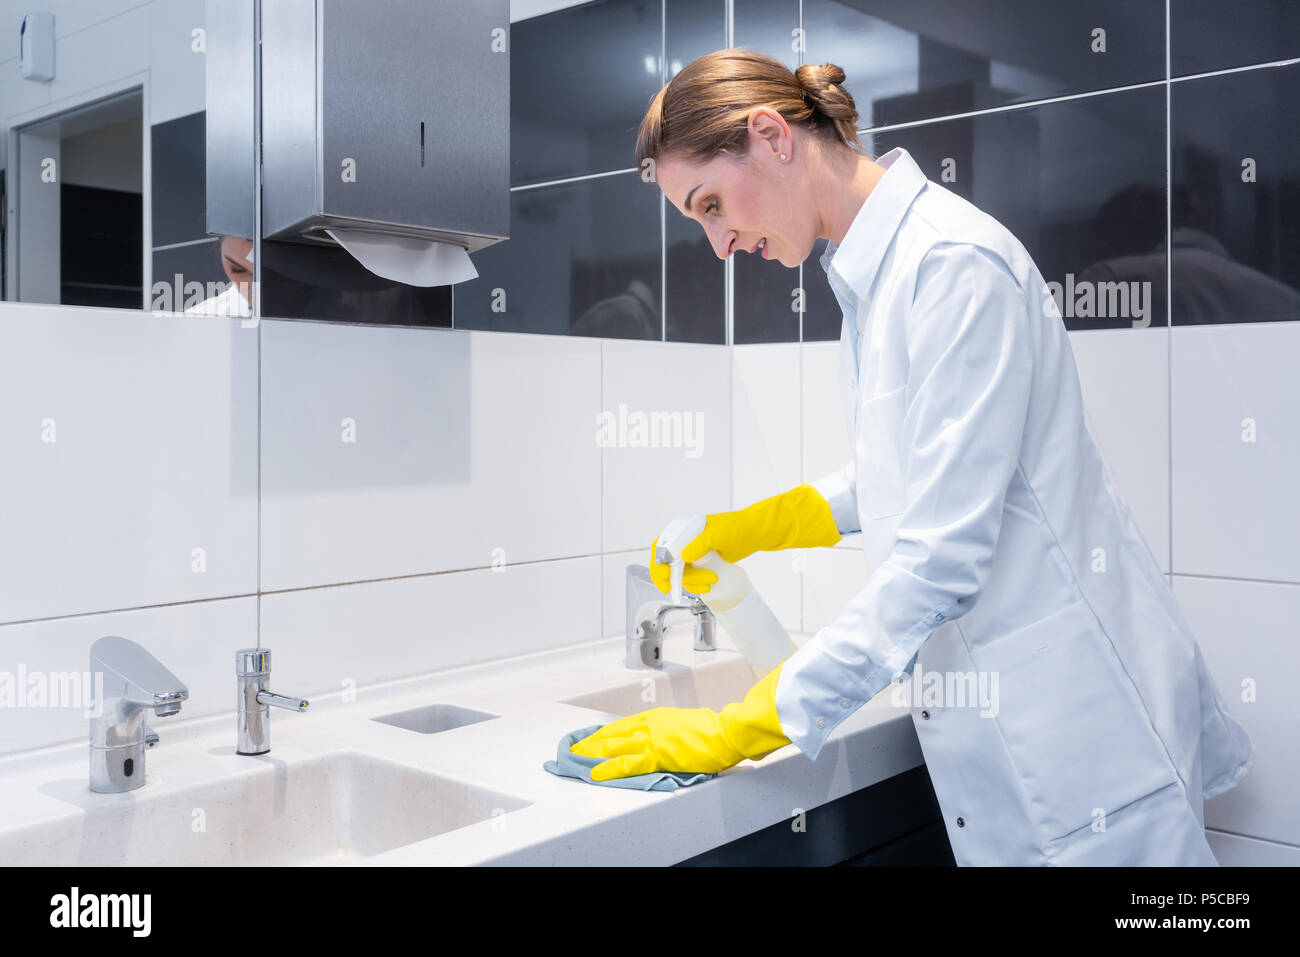 Janitor cleaning sink in public washroom  Stock Photo